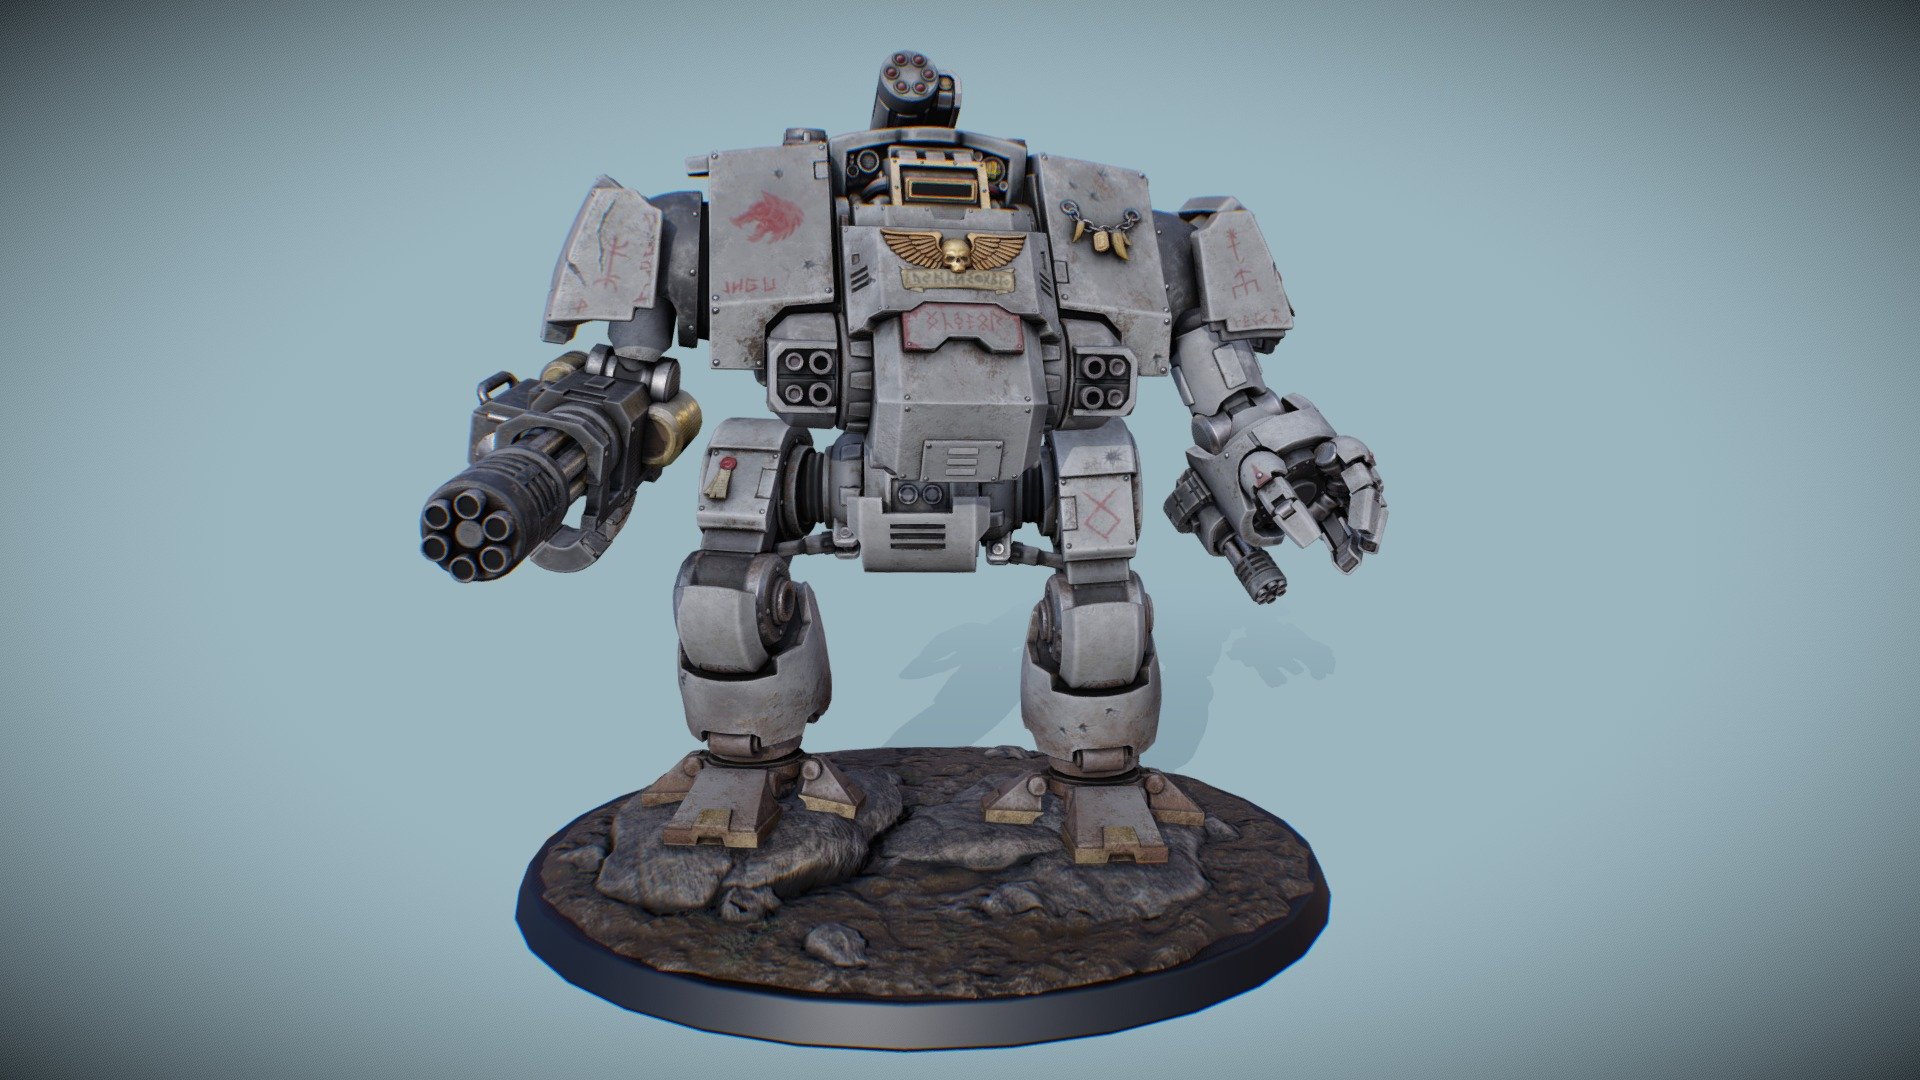 3d model i've been working on for a few months now. the base design comes from the universe Warhammer 40k, i decided to make it a space wolf dreadnought with the old paint style of light gray/red instead of the blue/yellow one we mainly see, it's also part of the iron wolves Great Company. modelled with blender and textured with substance painter, i practiced a lot on using hardened normals in my workflow, most edges of the mesh are using this to help smooth the shape. the model is rigged and has a material with 1 set of 4k PBR textures, the base with rocks and dirt is a speparate mesh with it's own material of 2k PBR baked textures. included with the .FBX and textures will be a .zip file with a blender database fully set up and ready to render 3d model